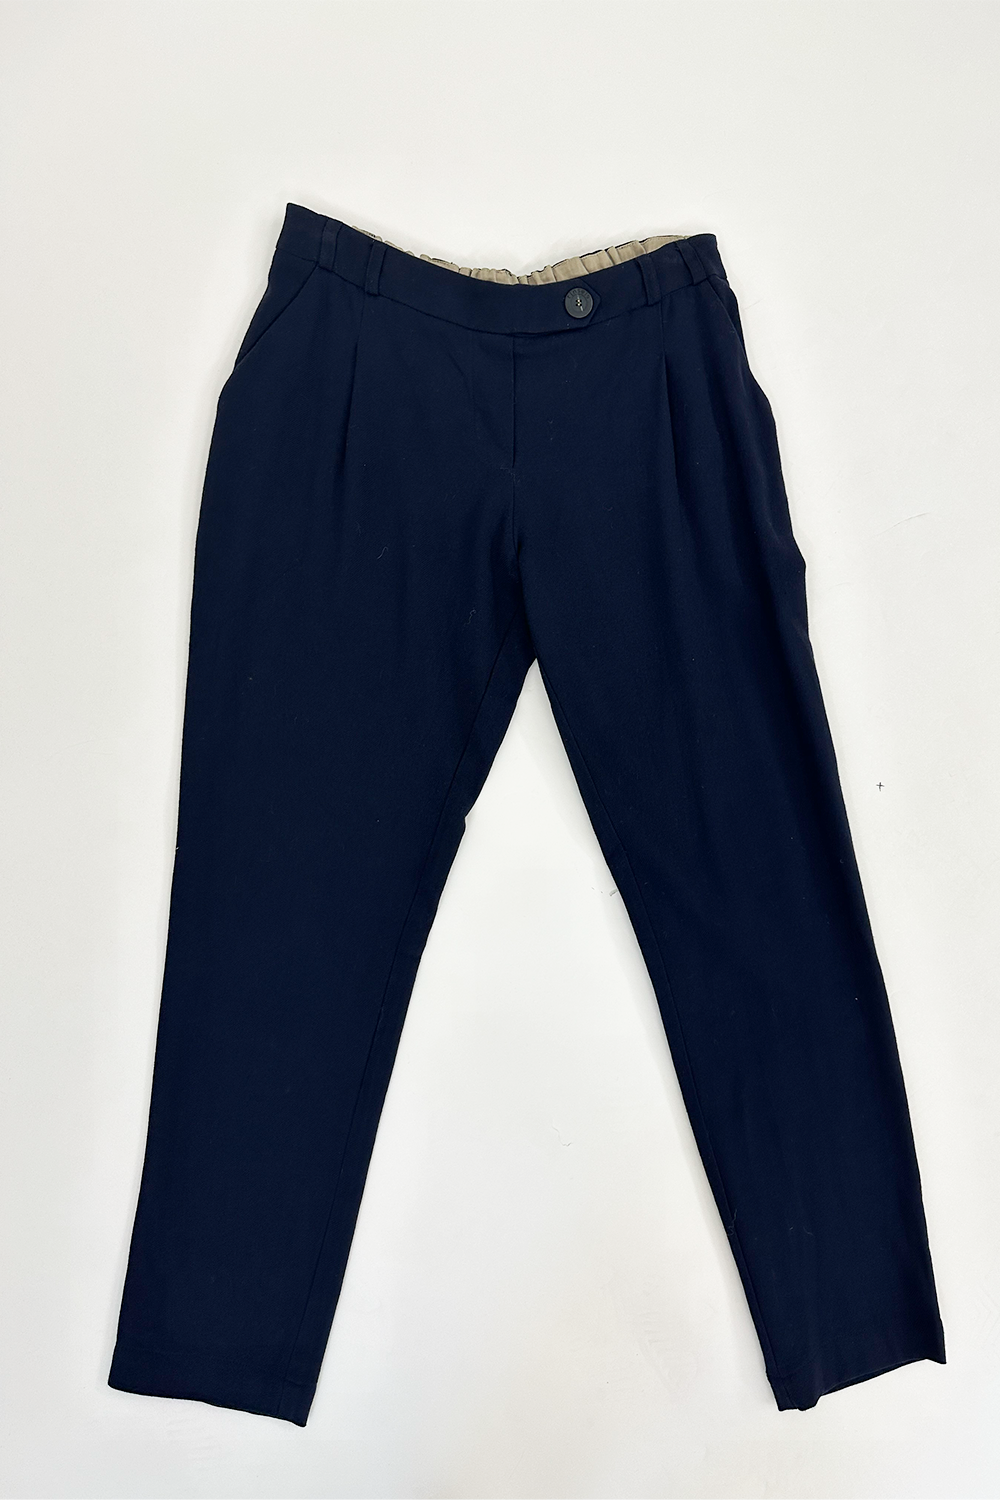 Tinsels - Irmoss Pant: Anthracite